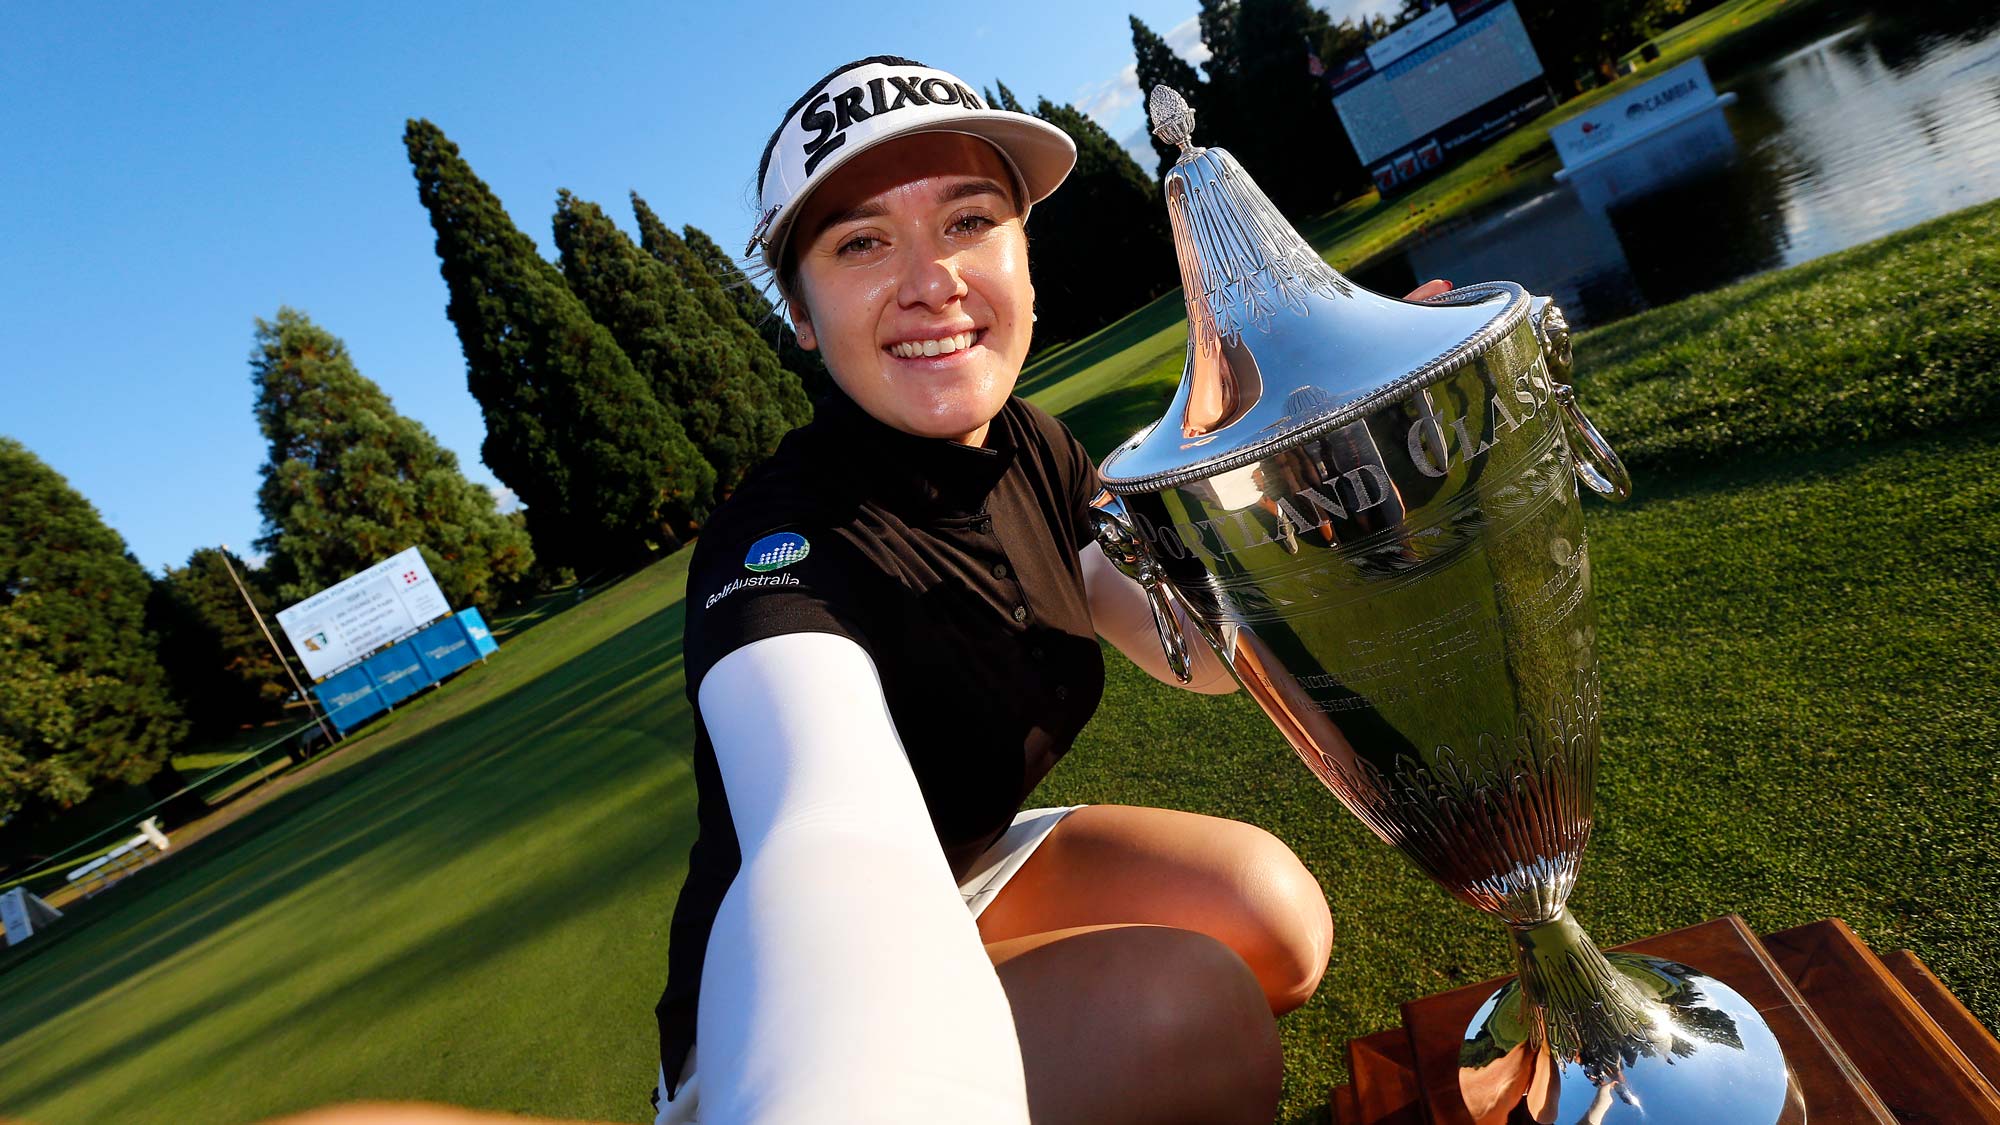 Hannah Green has her #BagsPacked for the 2020 Diamond Resorts Tournament of Champions after her victory at the 2019 Cambia Portland Classic